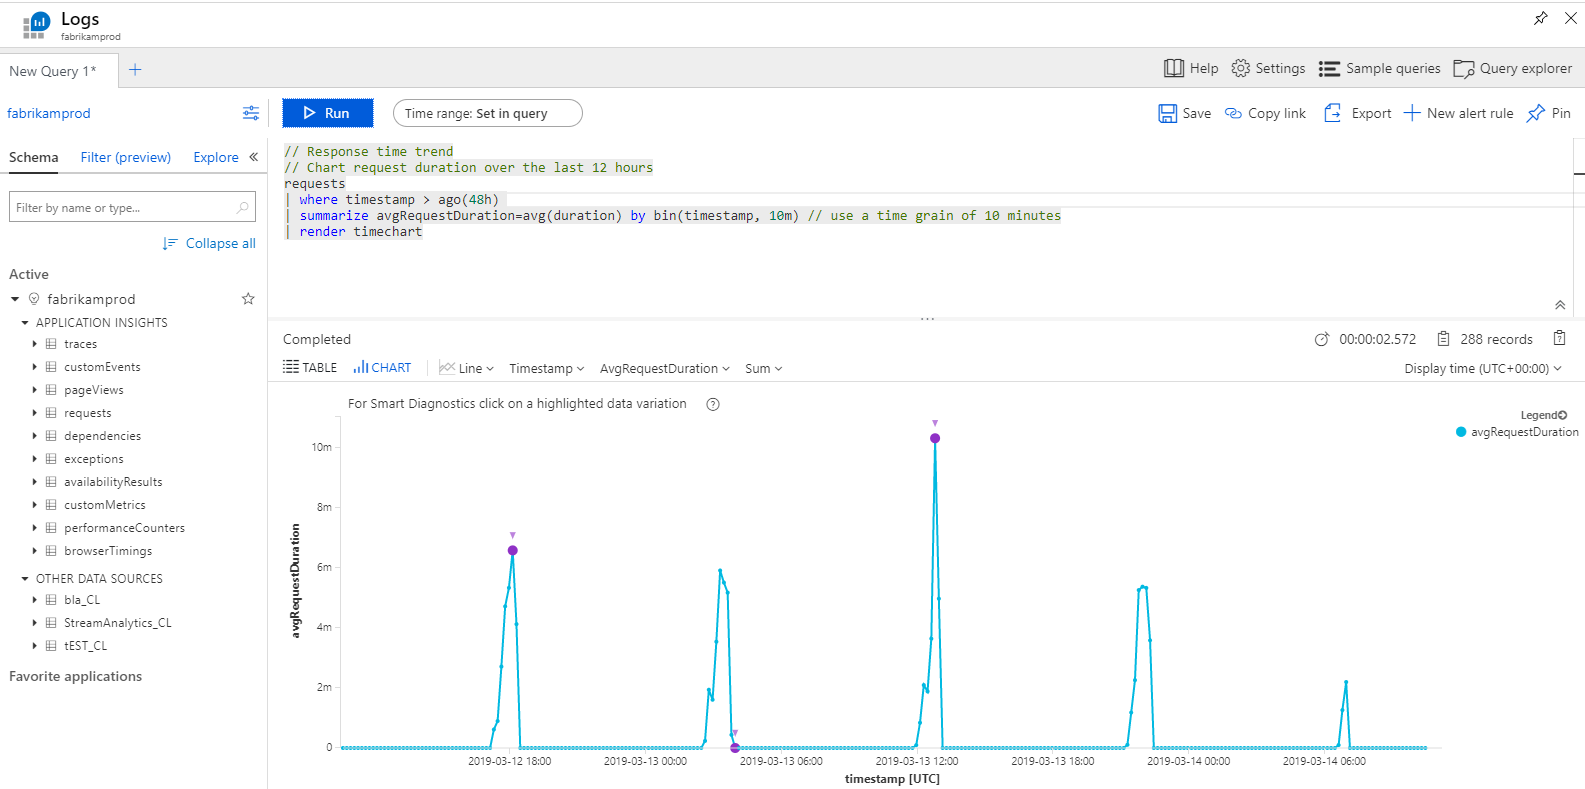 Screenshot that shows an example of Log Analytics in the Azure portal.